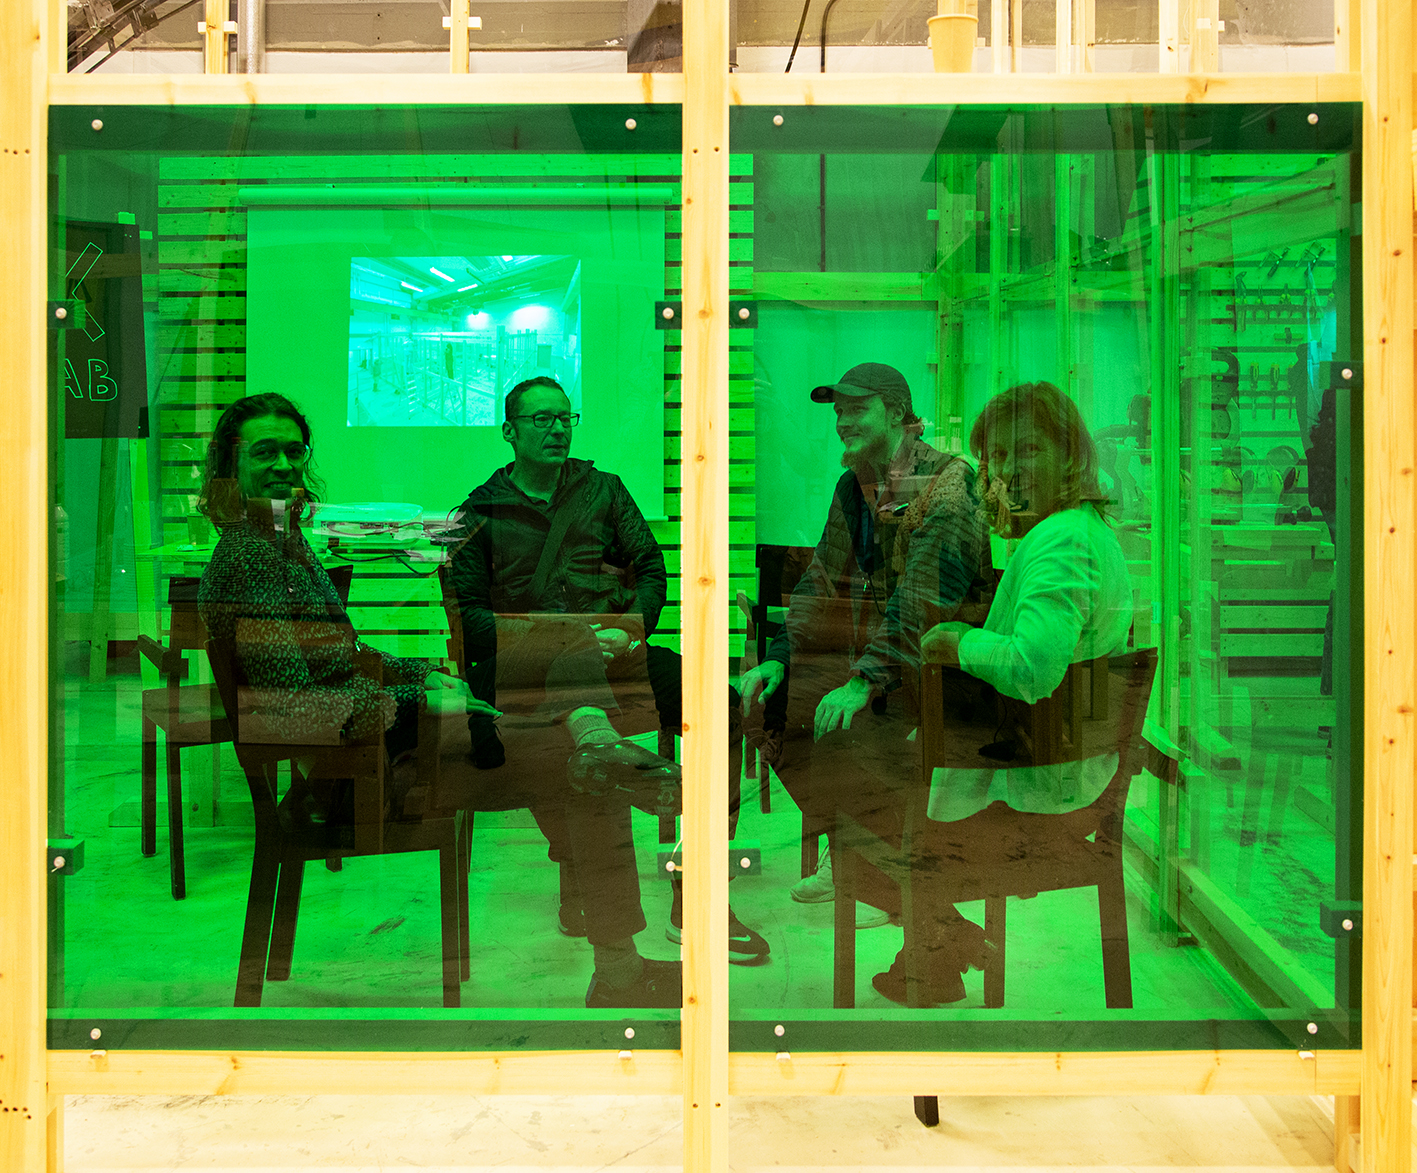 A group of people talking and smiling behind a green glass wall. Photo.